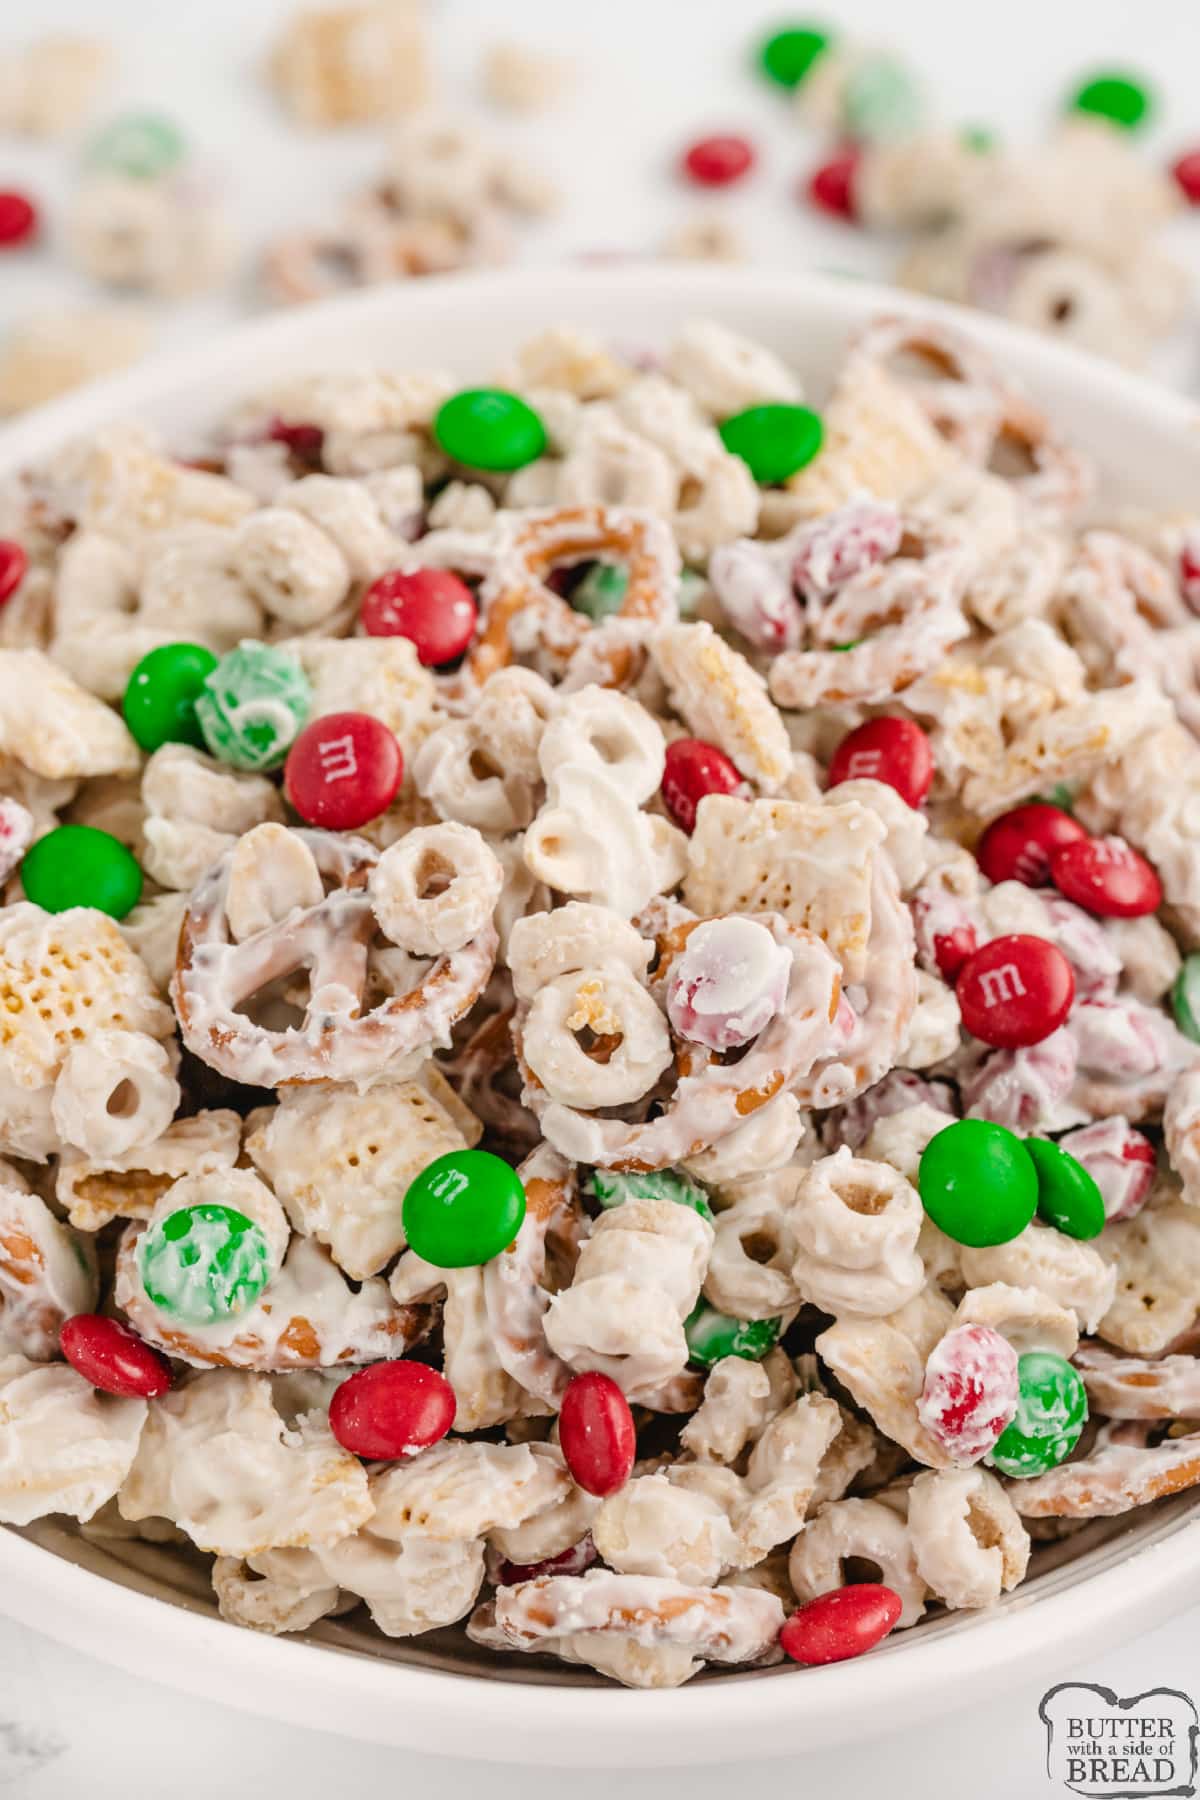 White Chocolate Chex Mix is made with cereal, pretzels, peanuts and M&Ms all coated in white chocolate. This easy white chocolate chex mix recipe is salty and sweet and comes together in less than 5 minutes!